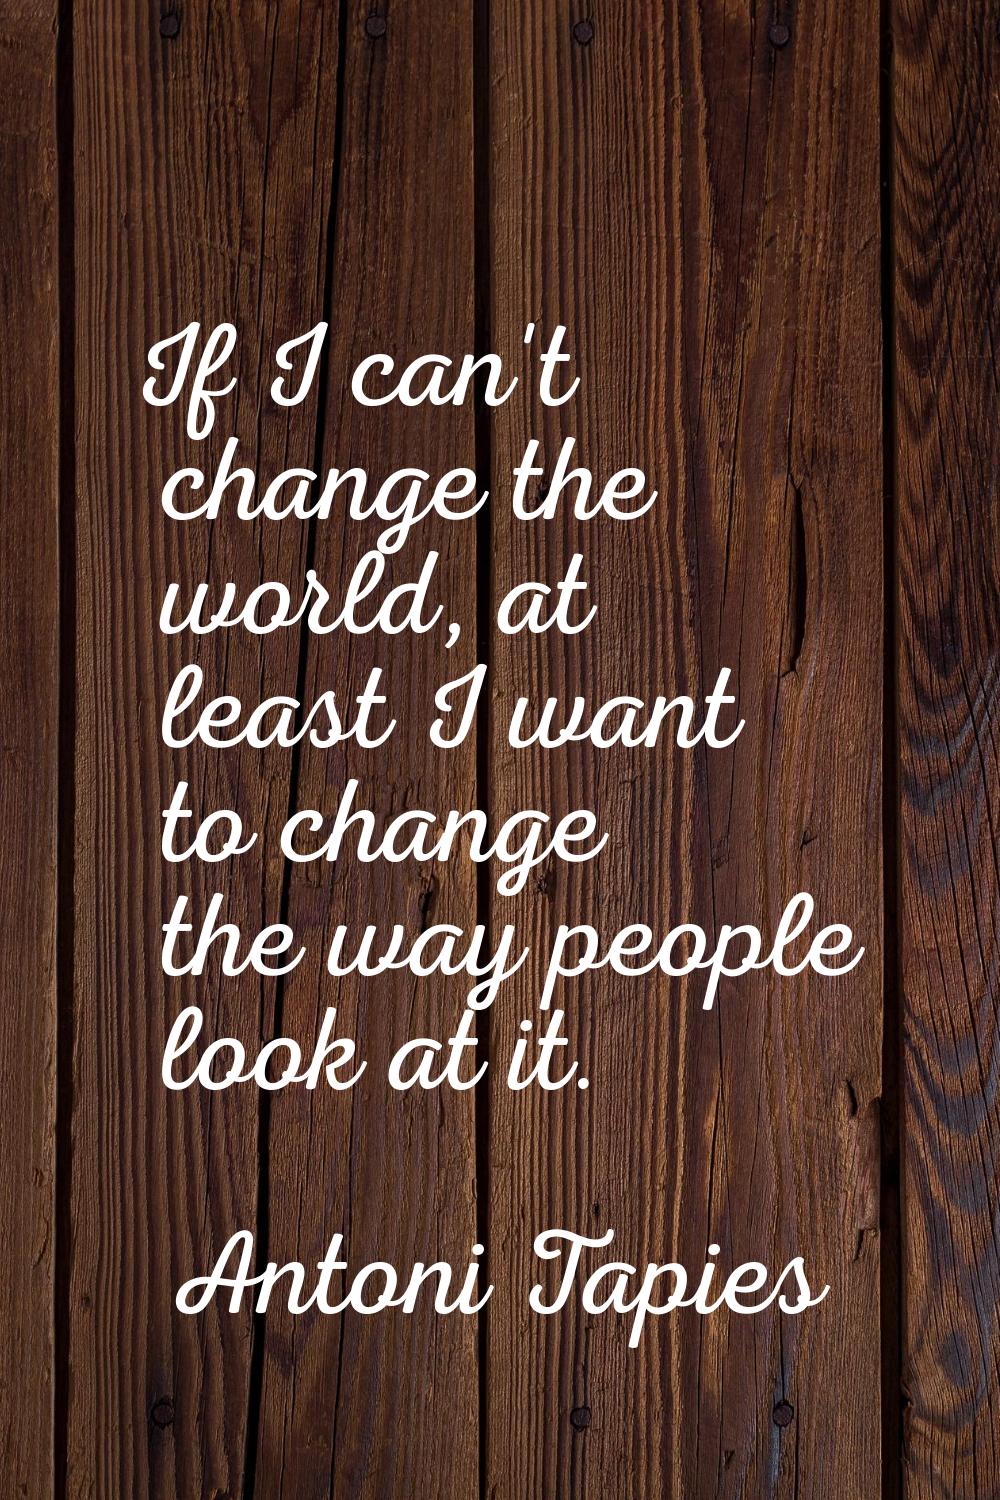 If I can't change the world, at least I want to change the way people look at it.